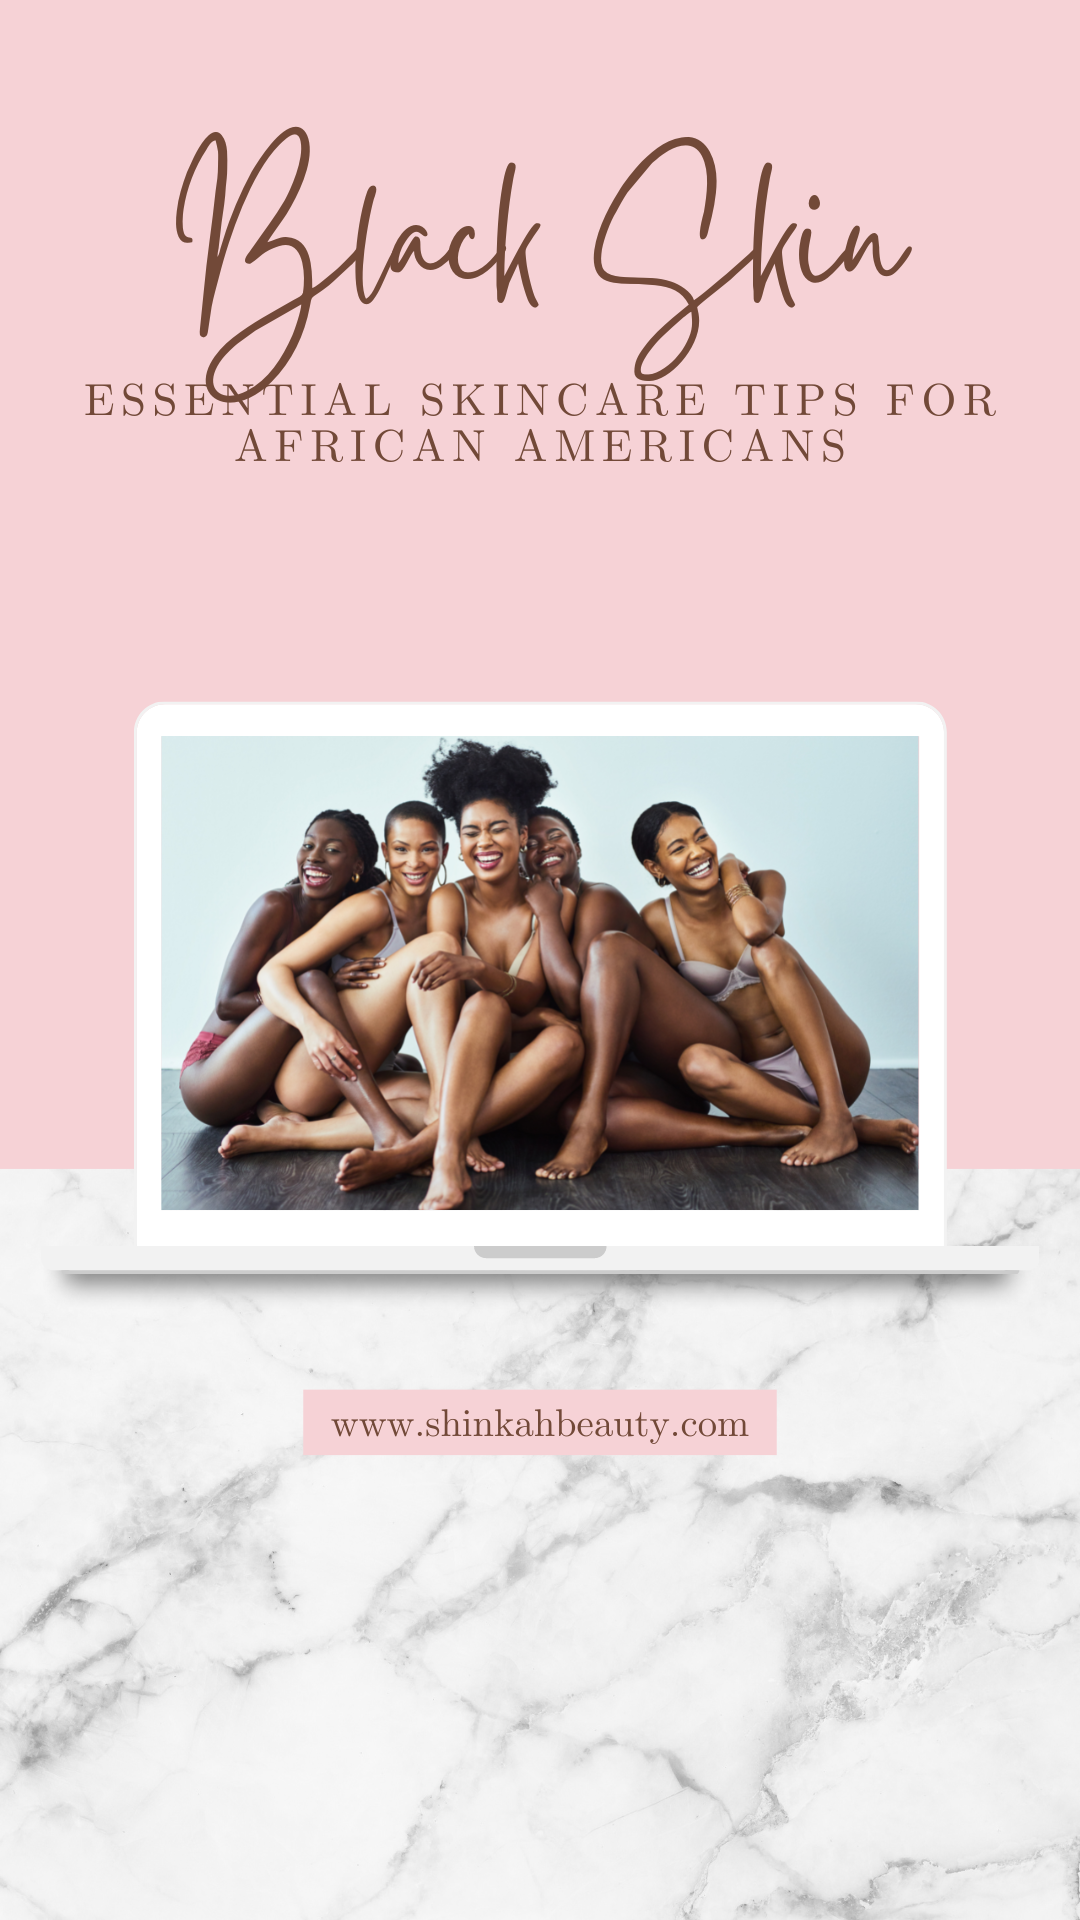 Black Skin: Essential Skincare Tips for African Americans